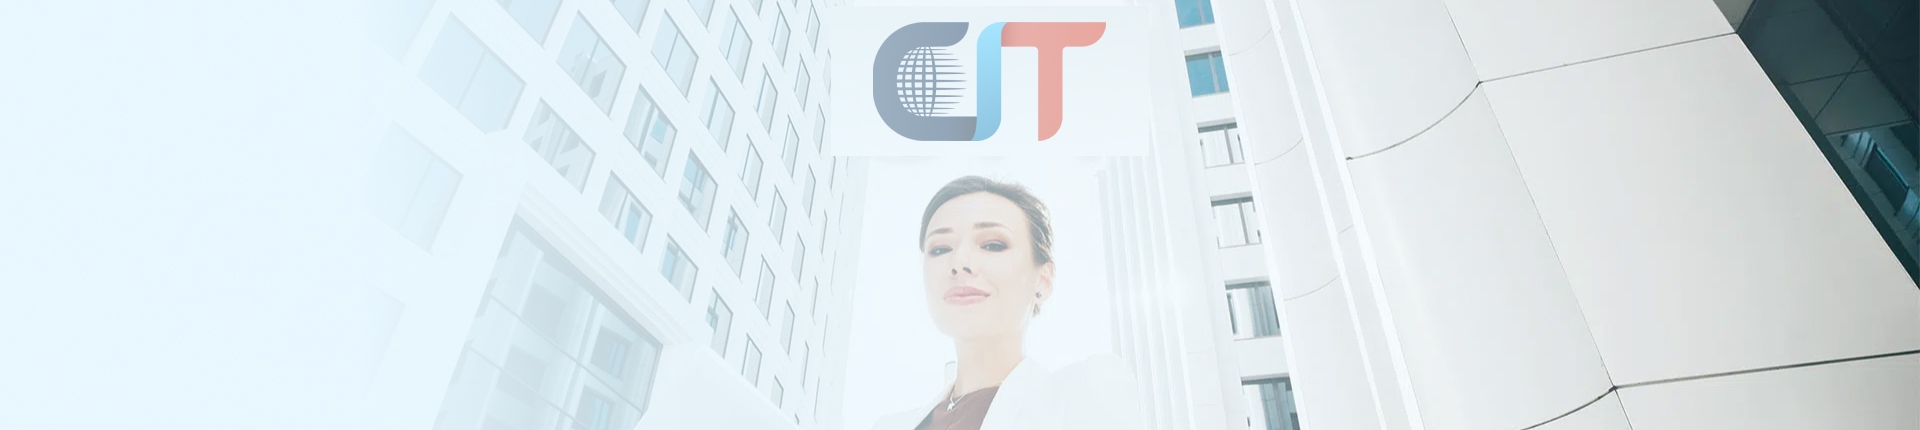 Background image of a woman standing between two tall buildings and looking at the camera with the Cal Interpreting and Translations logo above her head.